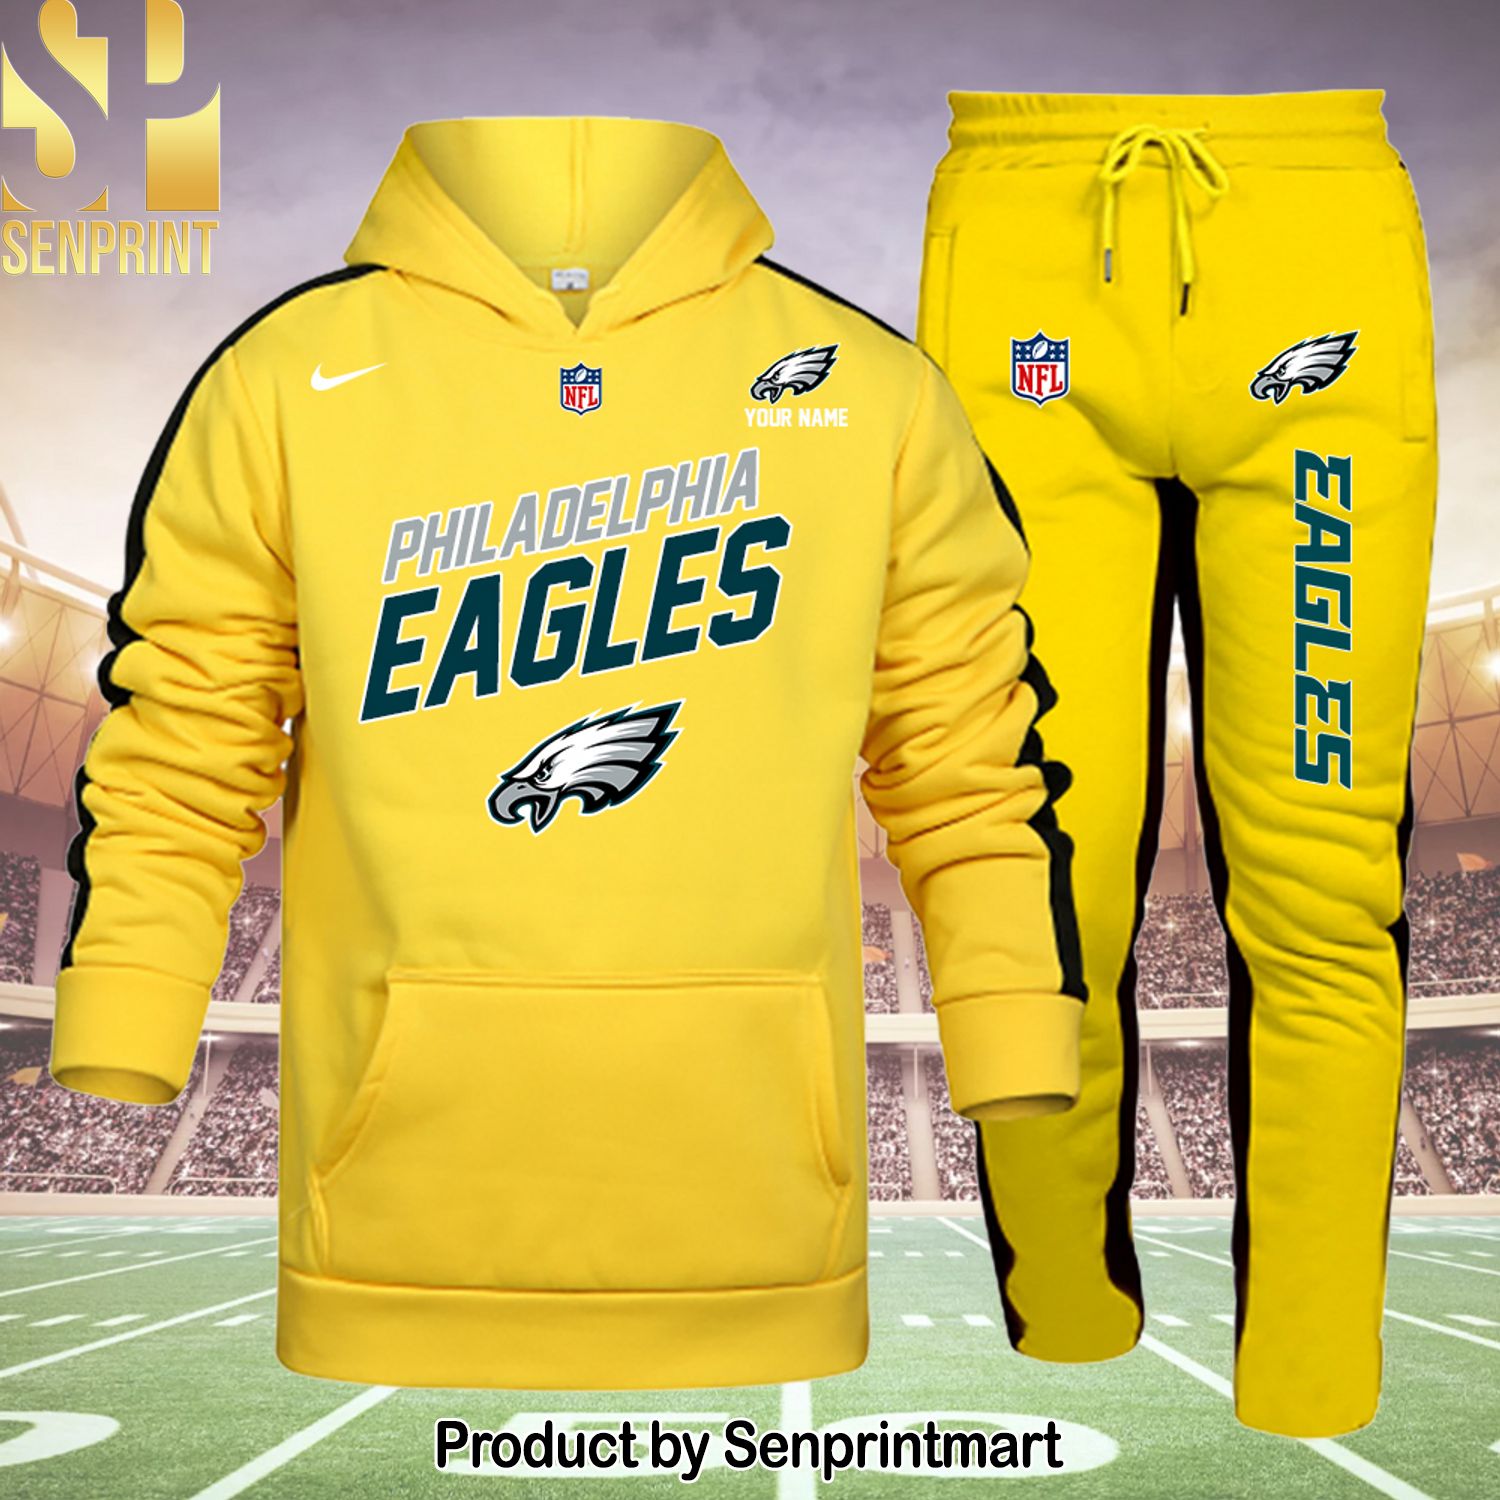 Philadelphia Eagles Awesome Outfit Shirt and Pants